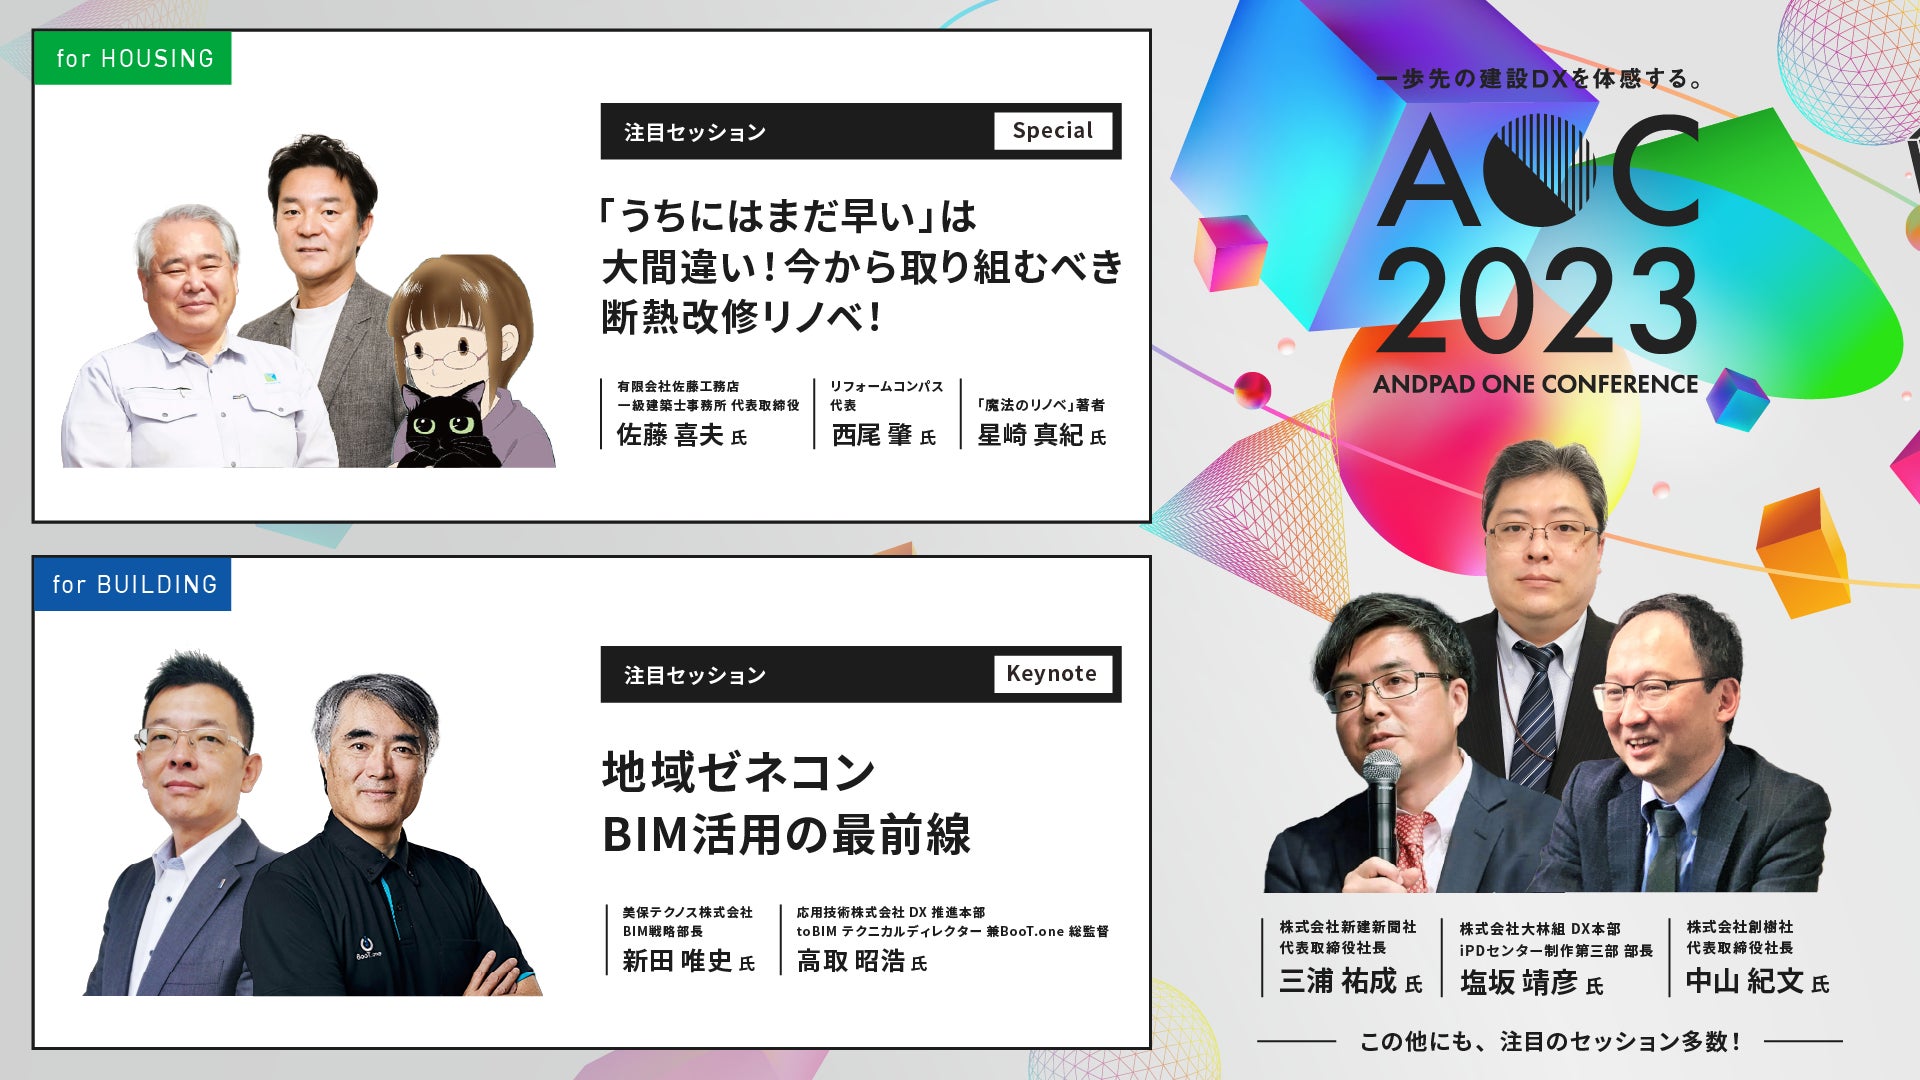 「ANDPAD ONE CONFERENCE 2023」を開催決定のサブ画像2